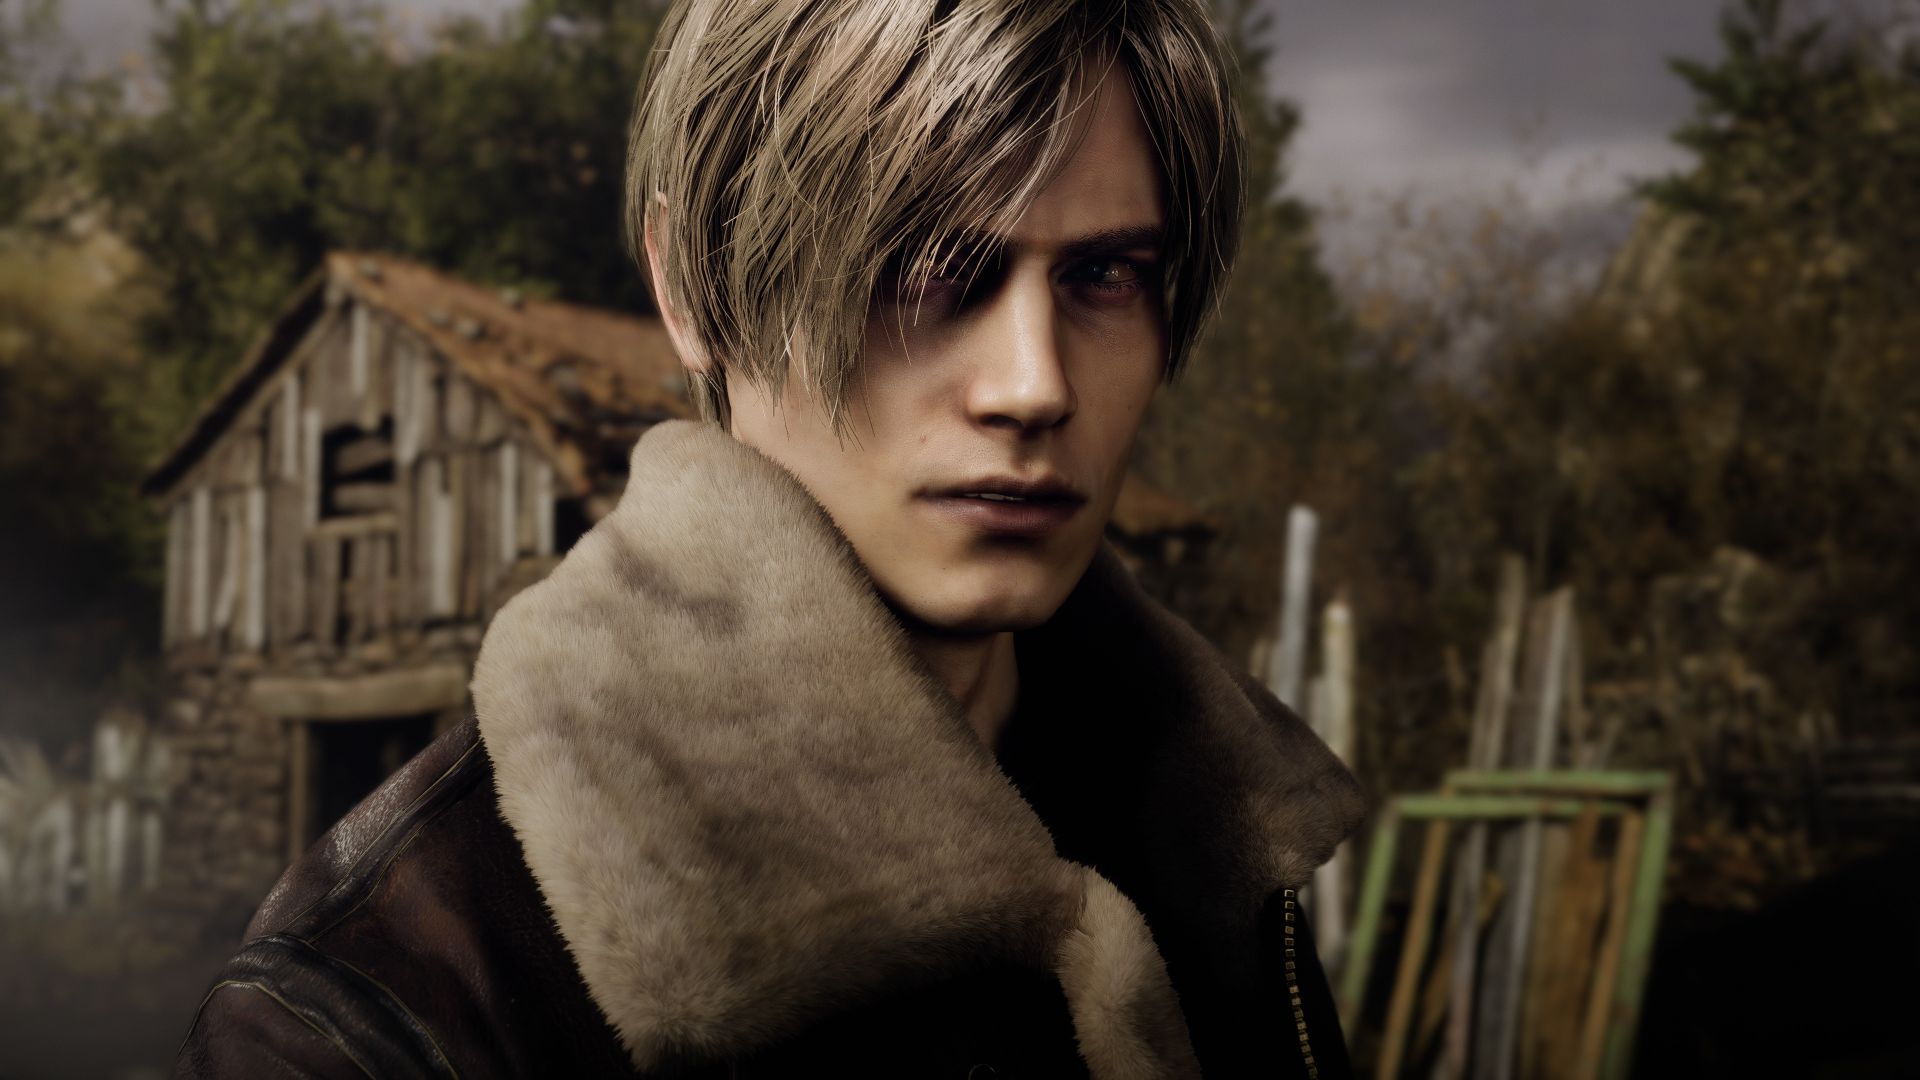 Eduard Badaluta, face model for popular video game character Leon Kennedy  from the Resident Evil video game franchise, confronts fan accounts in  Instagram after 4 years of harassment : r/Fauxmoi